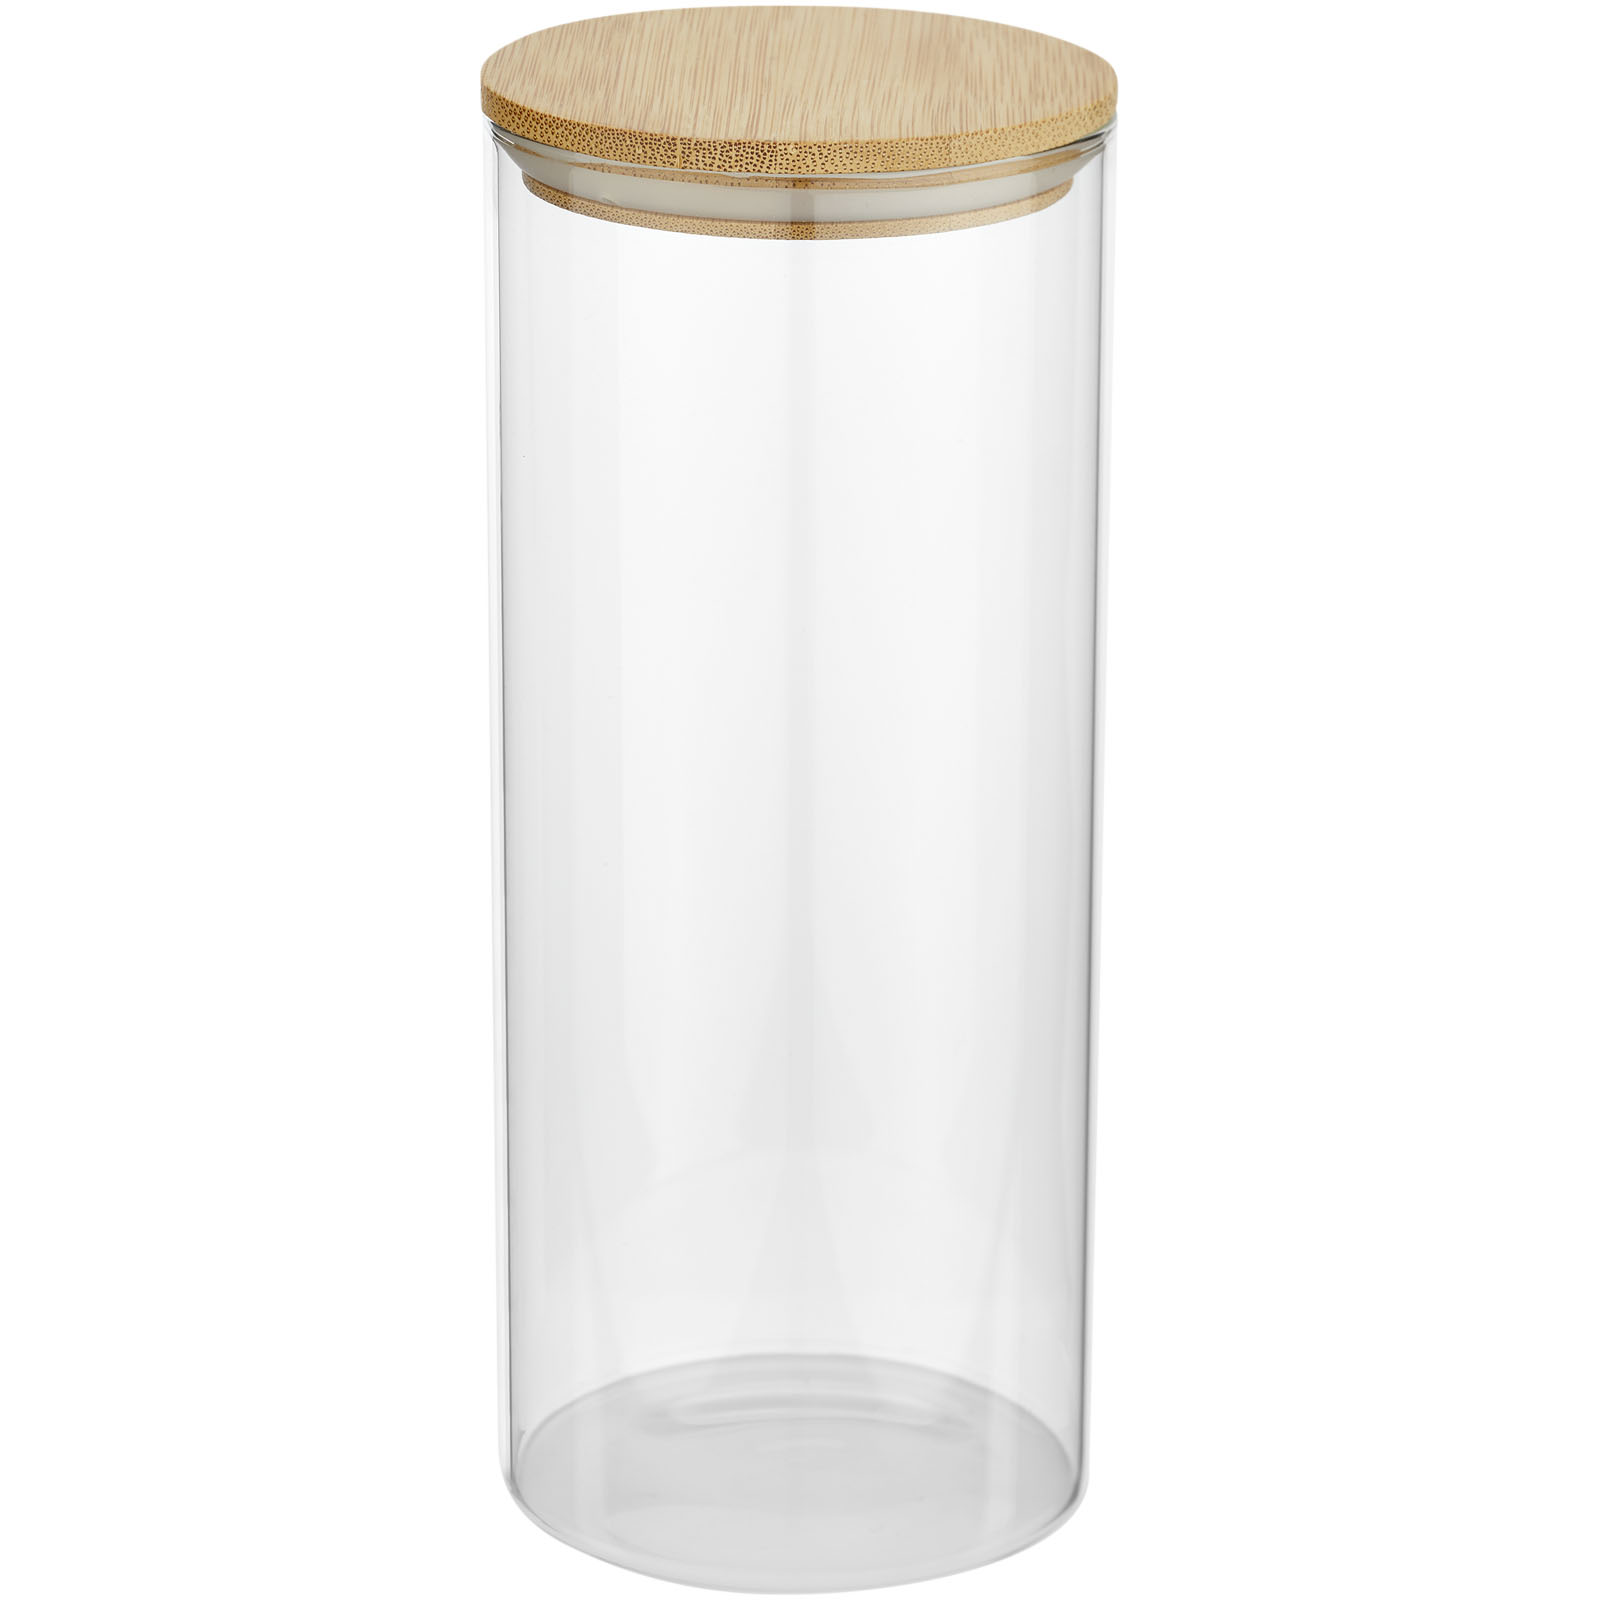 Advertising Kitchenware - Boley 940 ml glass food container - 0